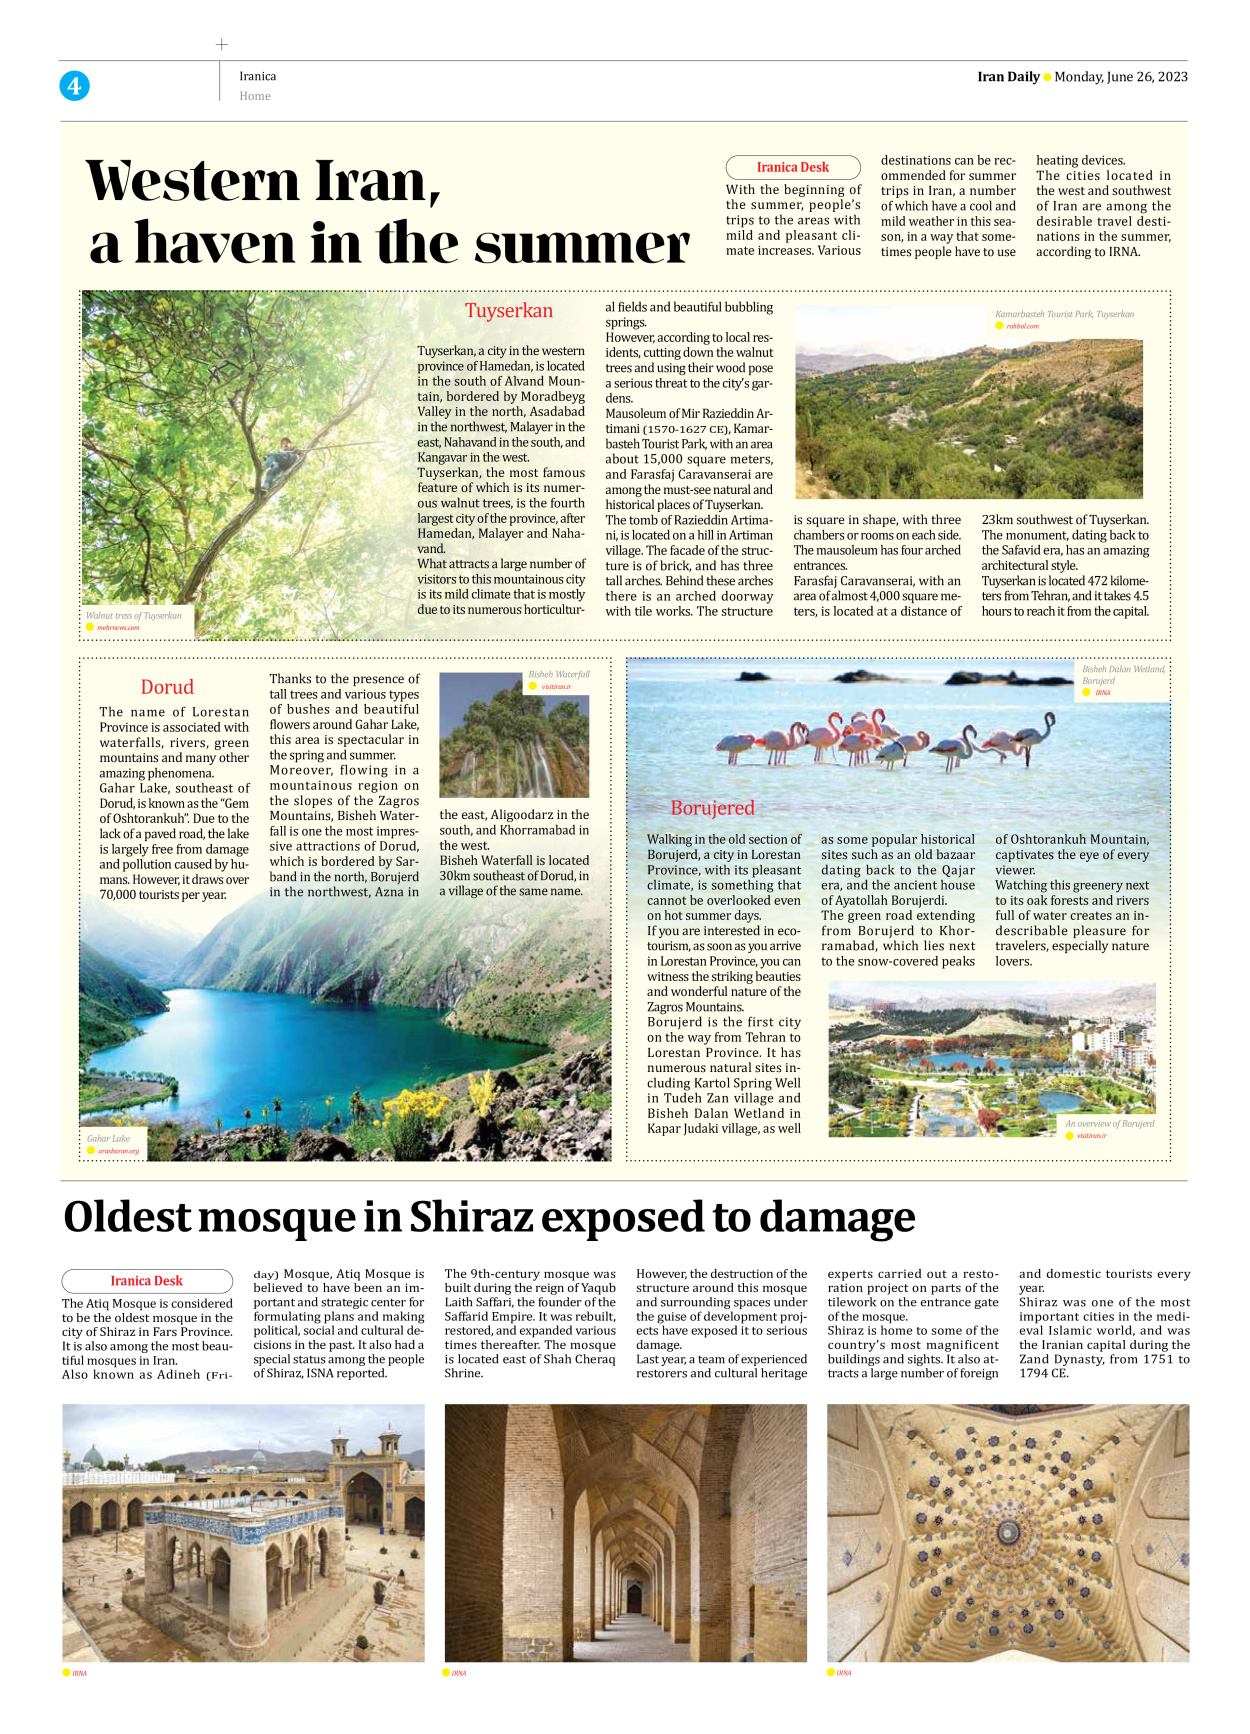 Iran Daily - Number Seven Thousand Three Hundred and Twenty Four - 26 June 2023 - Page 4